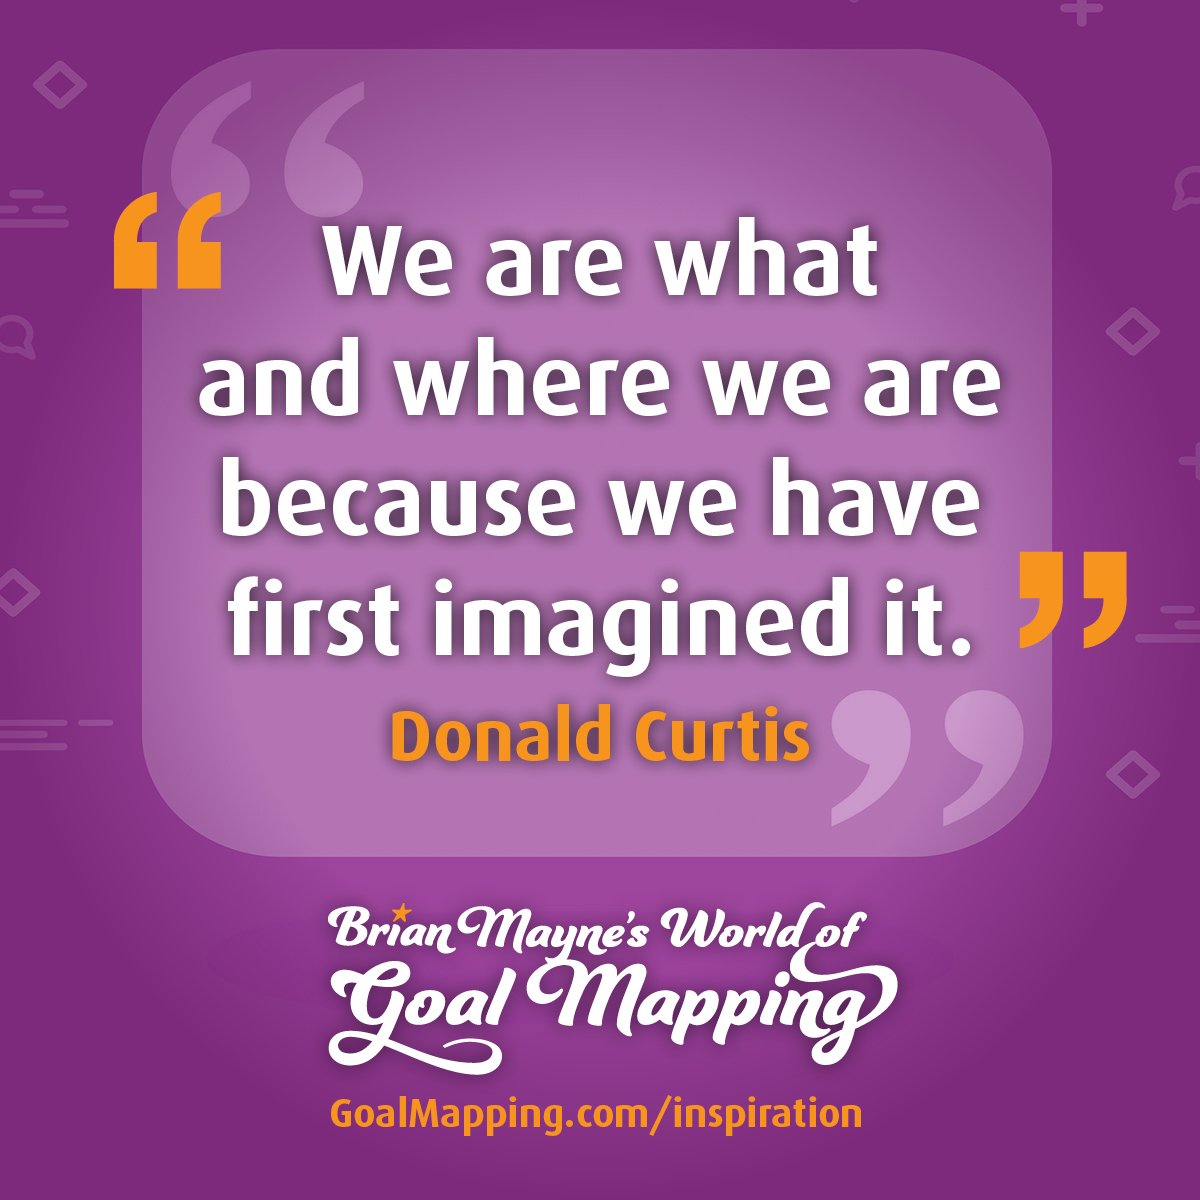 "We are what and where we are because we have first imagined it." Donald Curtis